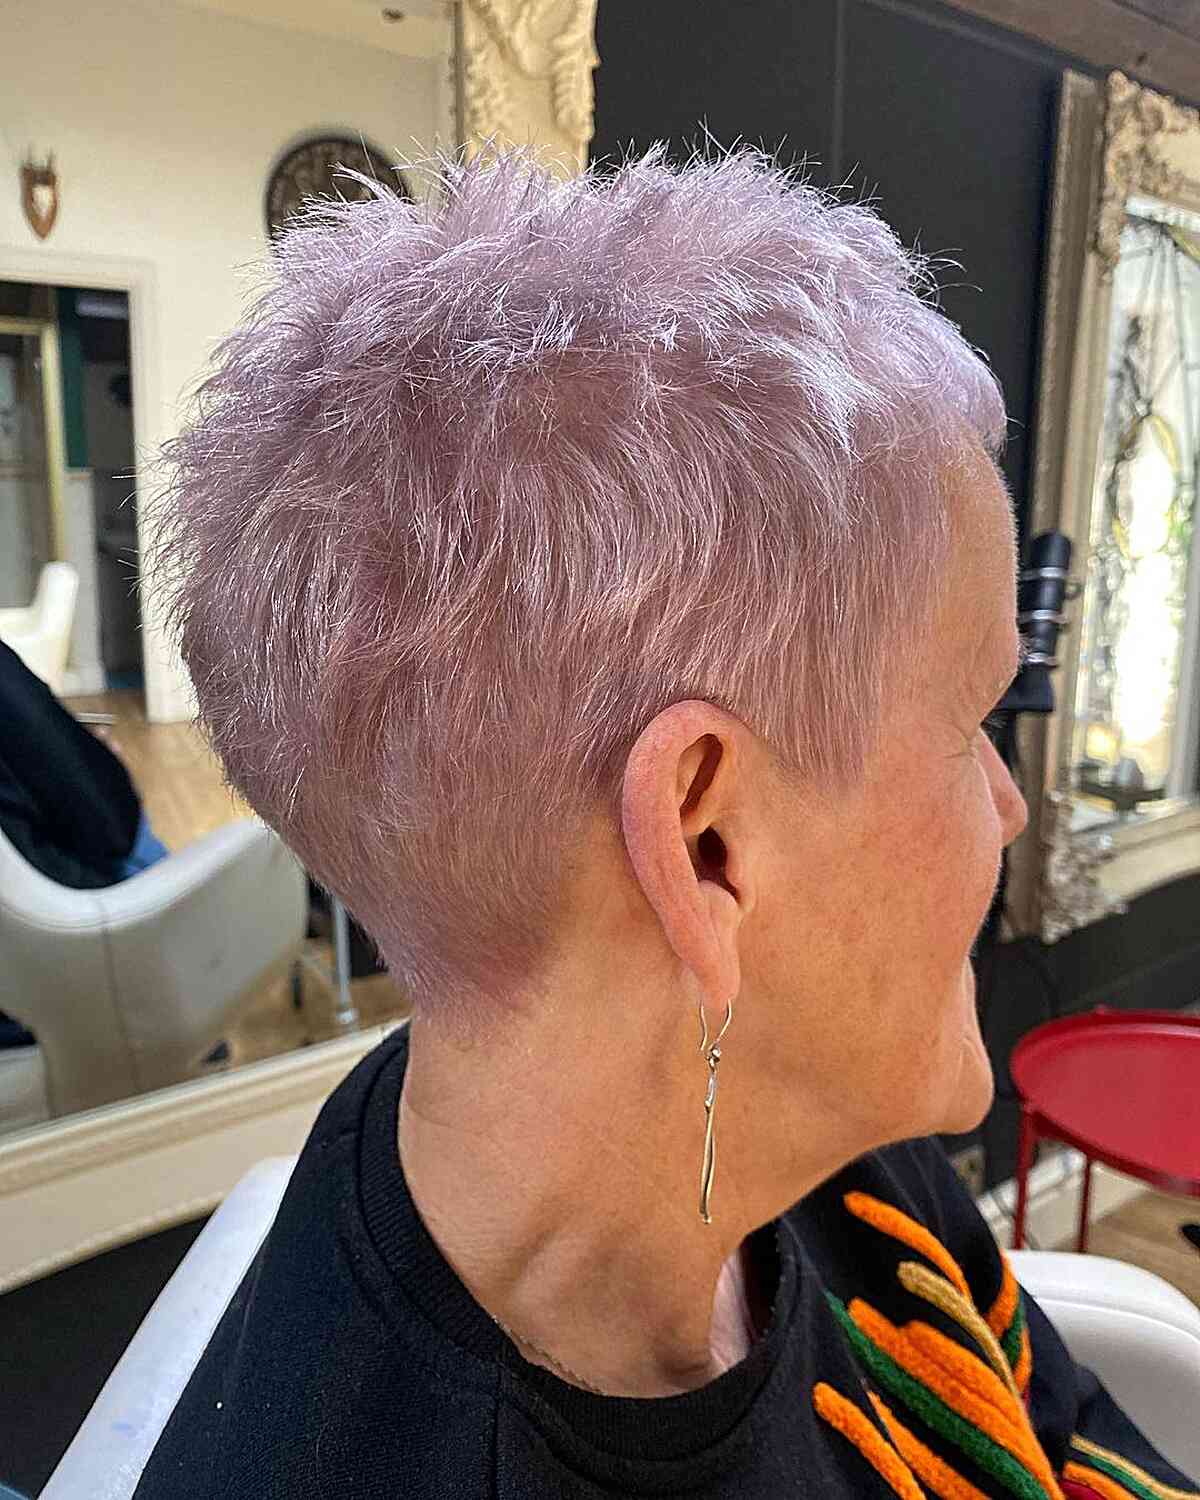 43 Gorgeous Hair Color Ideas Women Over 60 Are Getting in 2023